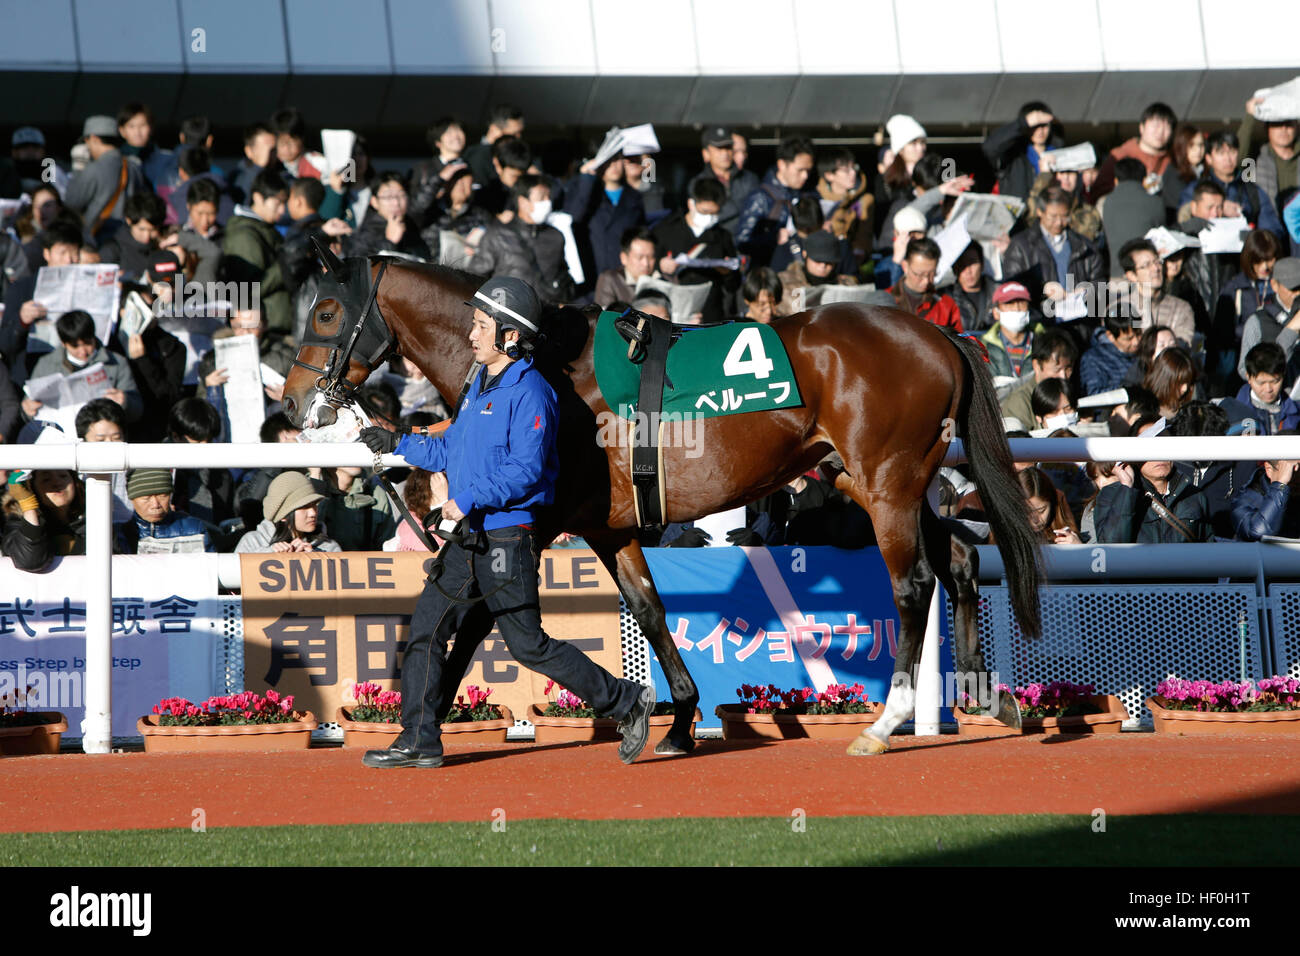 Hyogo, Japan. 10th Dec, 2016. Beruf Horse Racing : Beruf is led through the paddock before the Challenge Cup at Hanshin Racecourse in Hyogo, Japan . © Eiichi Yamane/AFLO/Alamy Live News Stock Photo